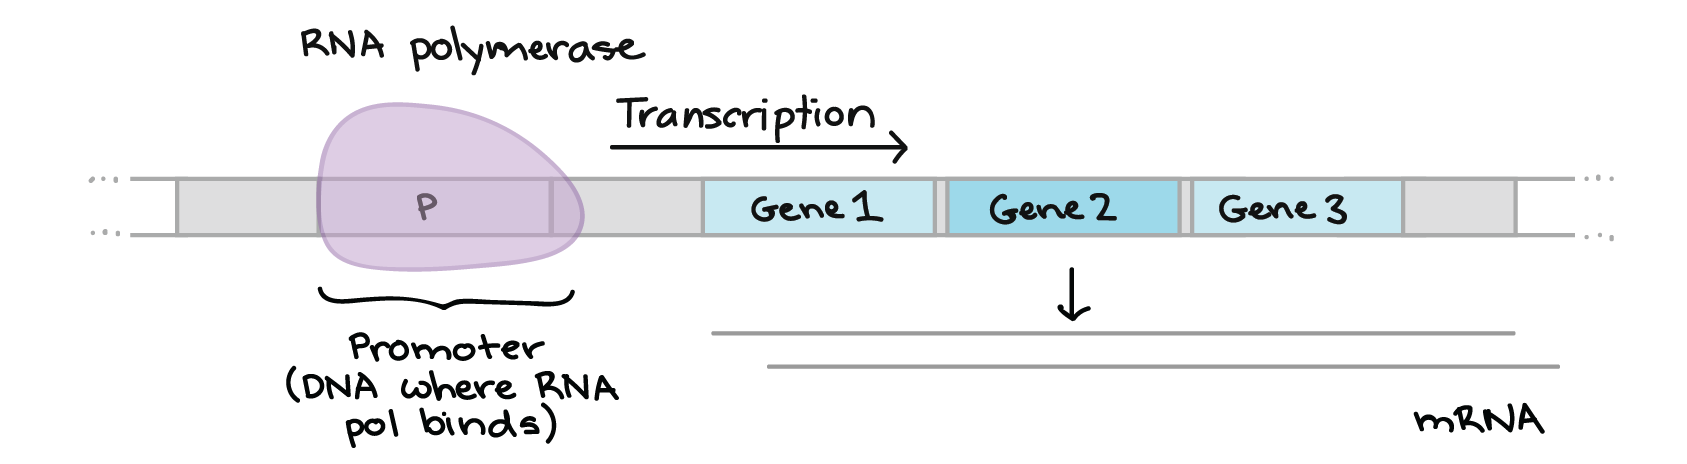 Diagram illustrating that the promoter is the site where RNA polymerase binds. The promoter is found in the DNA of the operon, upstream of (before) the genes. When the RNA polymerase binds to the promoter, it transcribes the operon and makes some mRNAs.